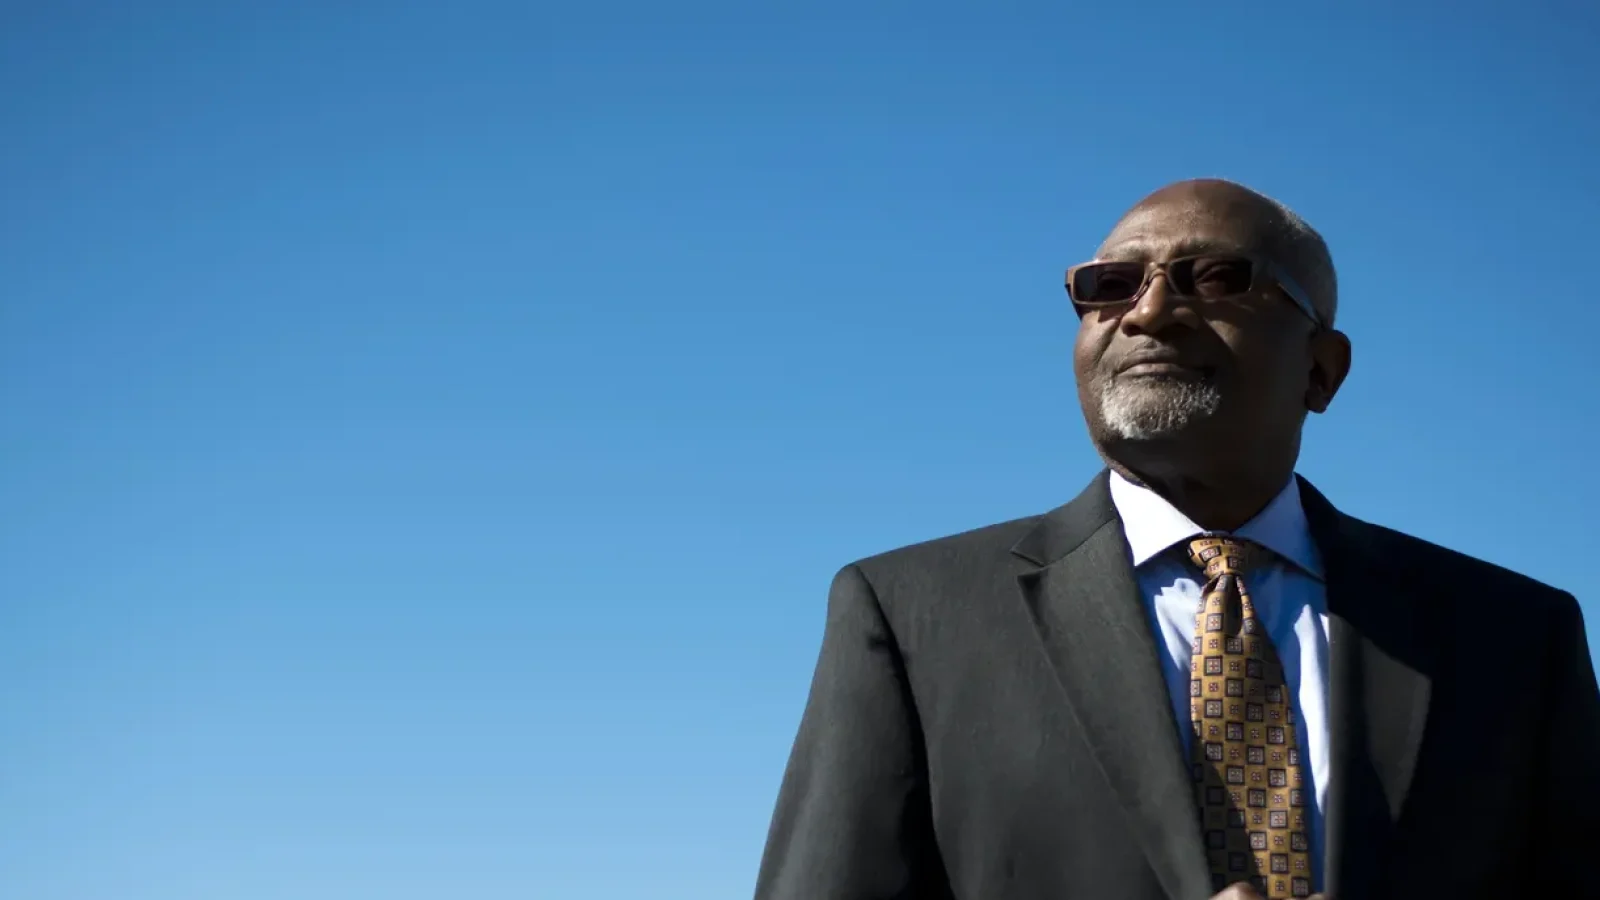 Bllard in suit with sunglasses, against blue sky.